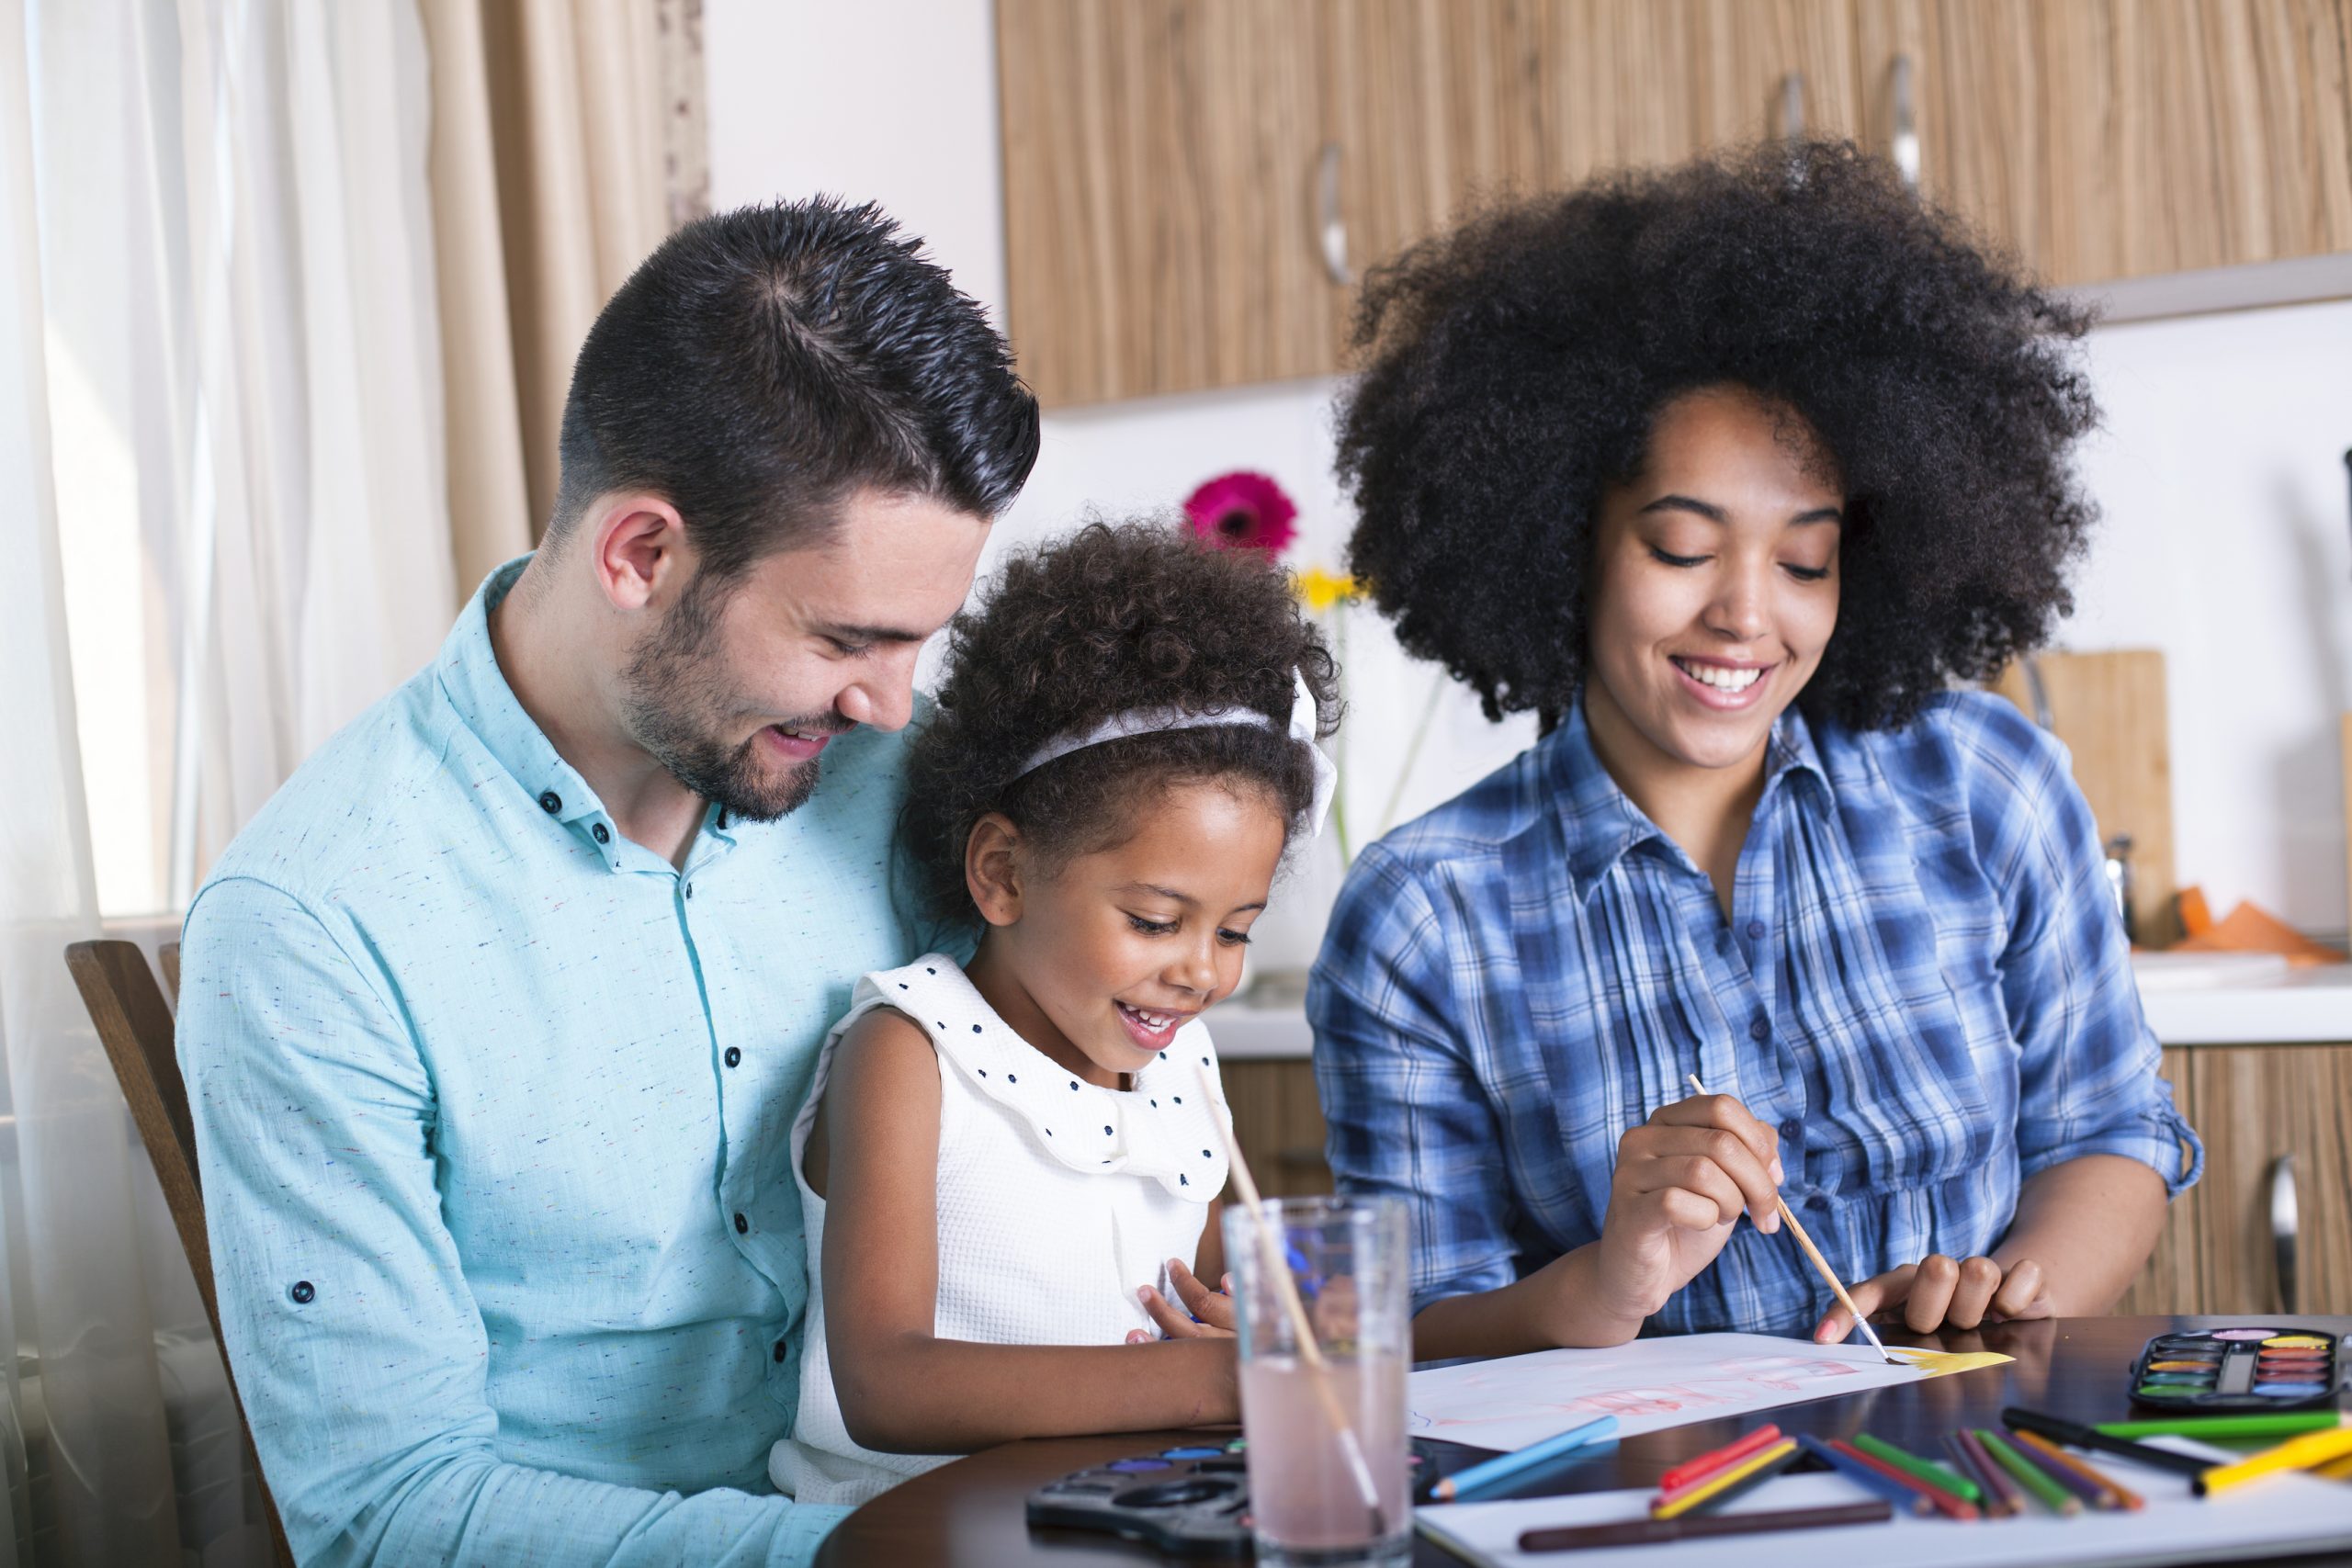 Take this time to connect with your children! We'll Be Sharing Daily Activities For Your Family.